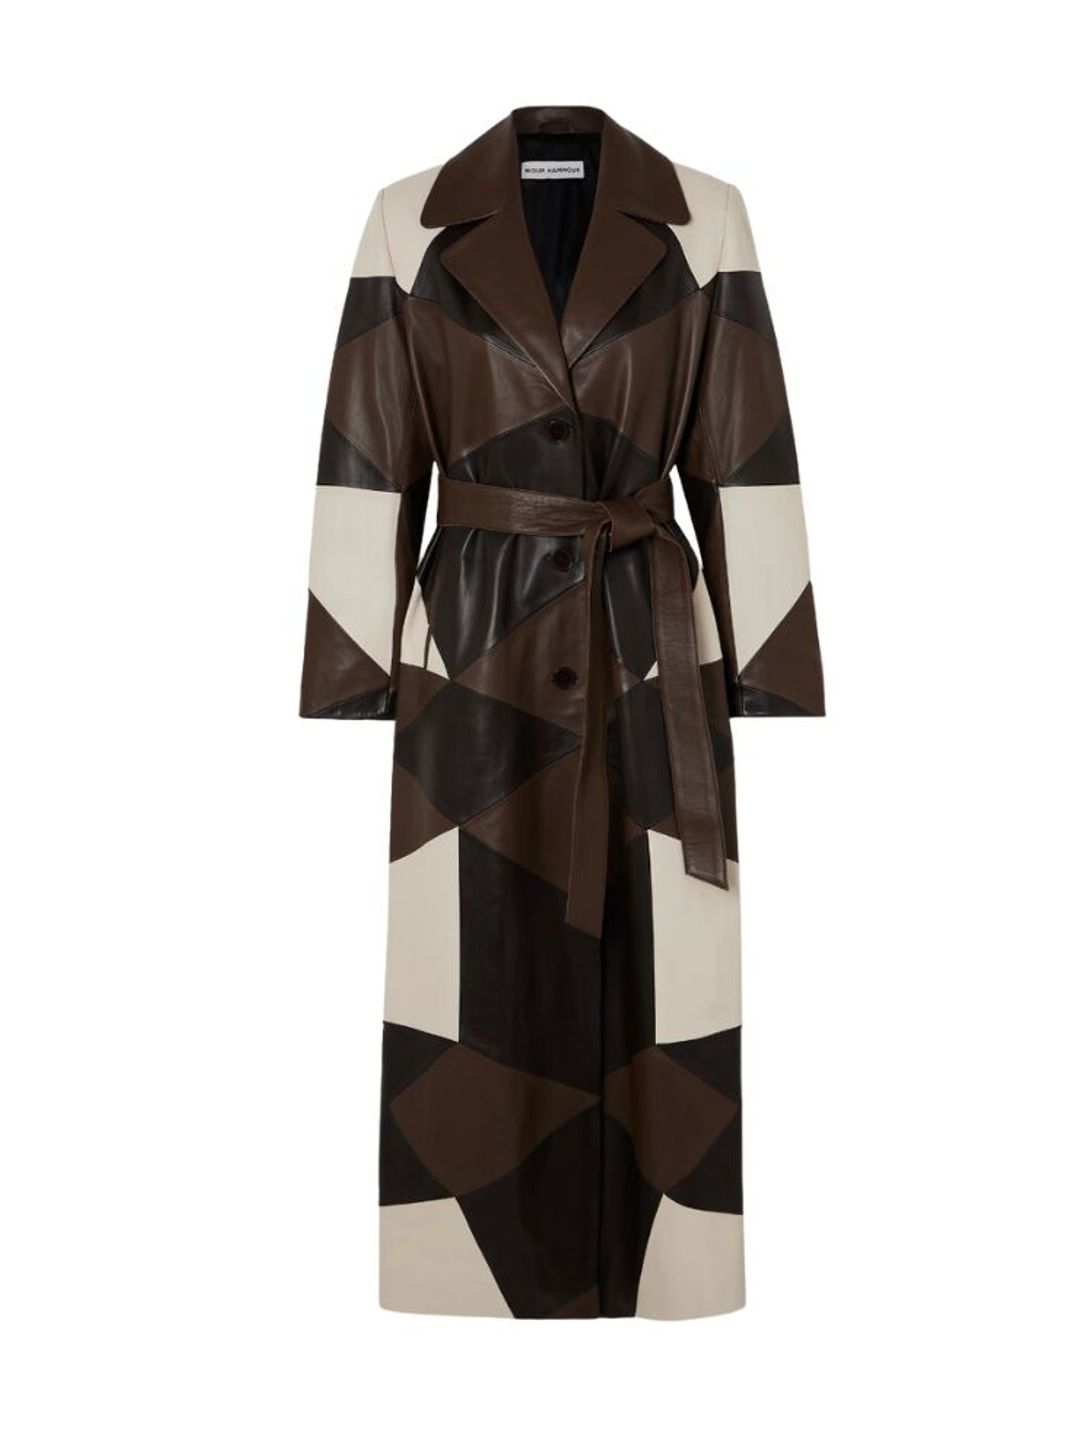 Brown, black and white leather coat 